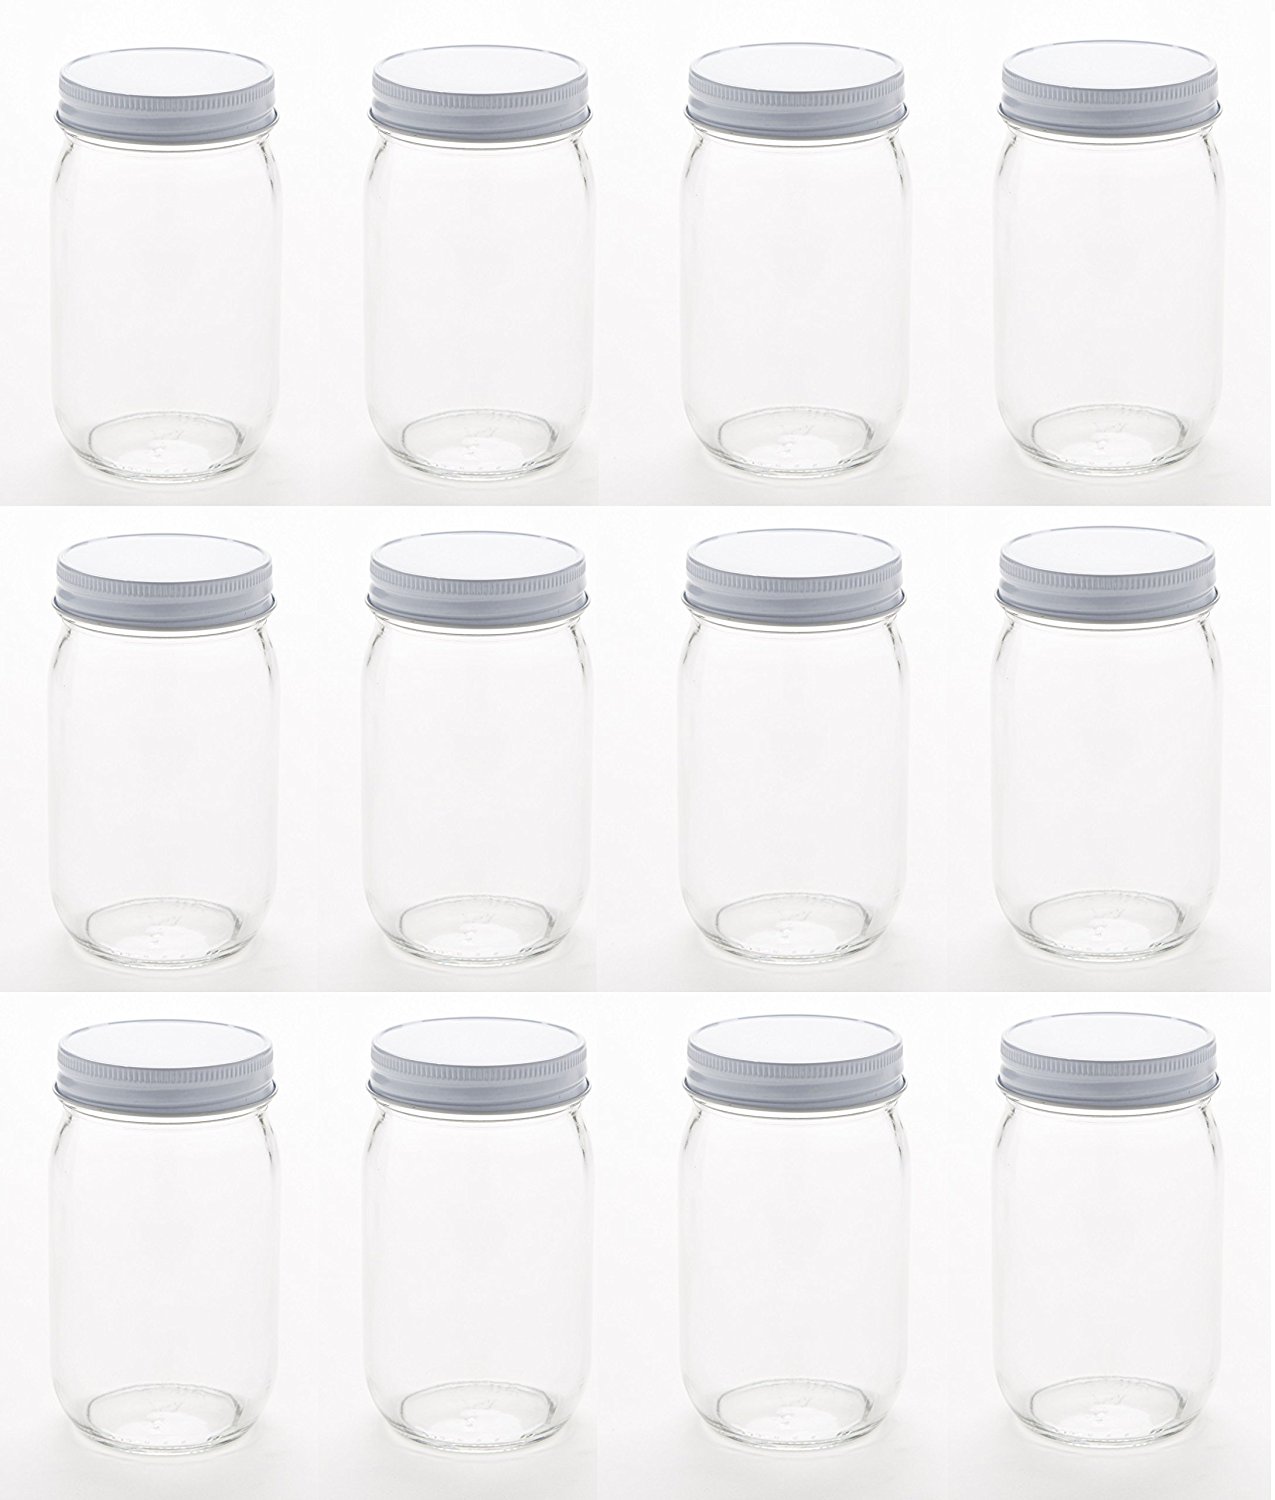 NMS 16 Ounce Glass Regular Mouth Mason Canning Jars - Case of 12